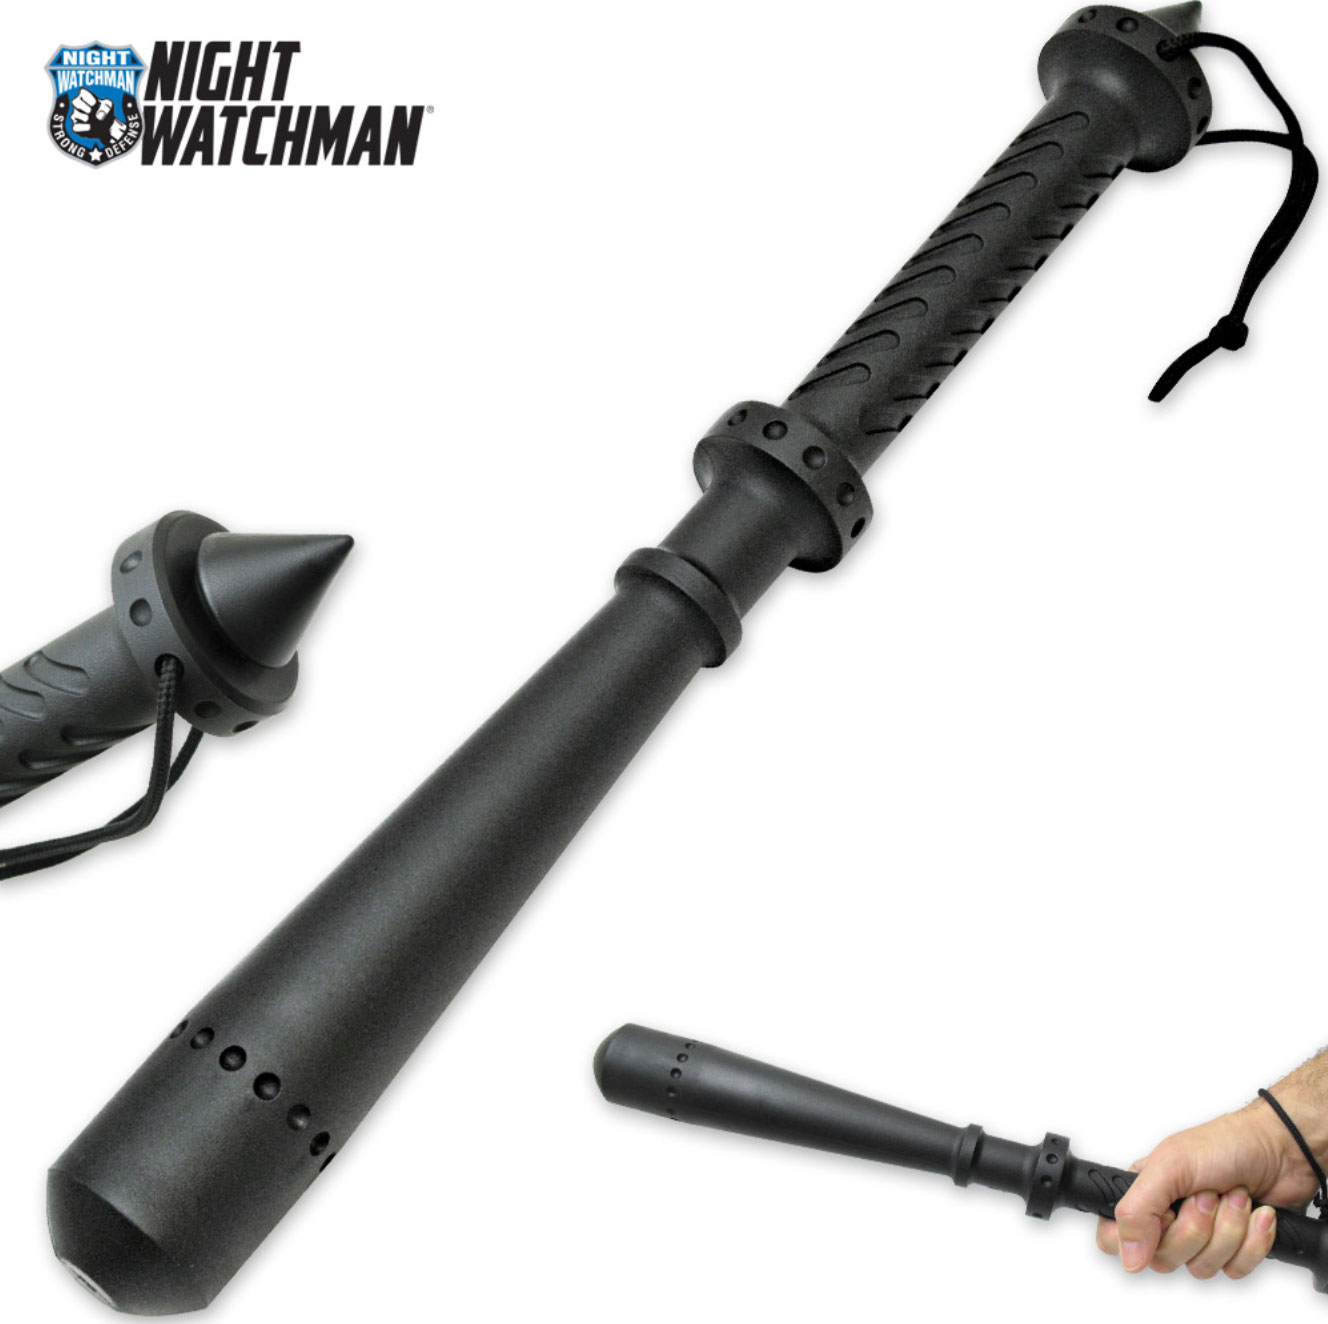 Night Watchman Thumper is a Formidable Tactical Tool.